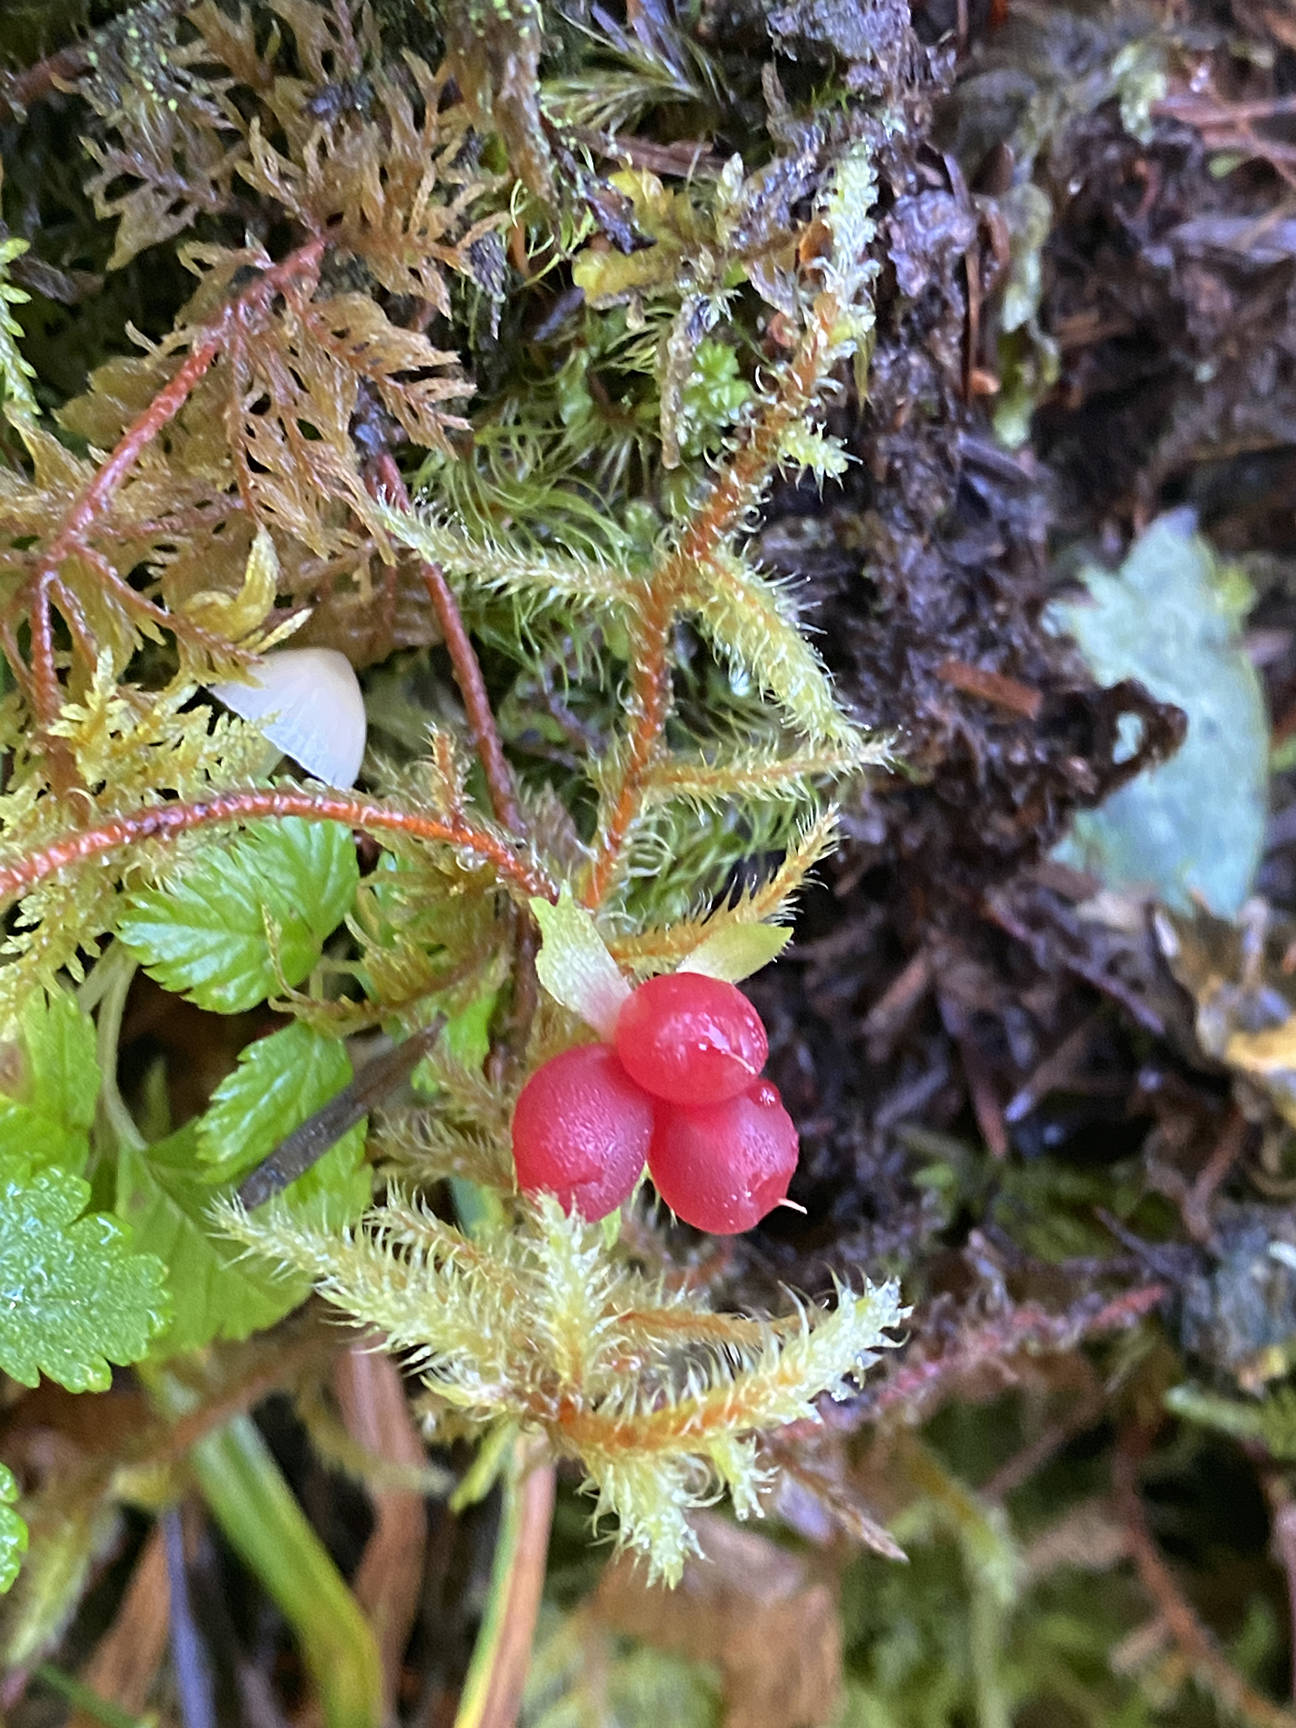 This photo shows a trailing raspberry at the Vista Creek shelter on Sept. 5, 2020. (Courtesy Photo / Deana Barajas)